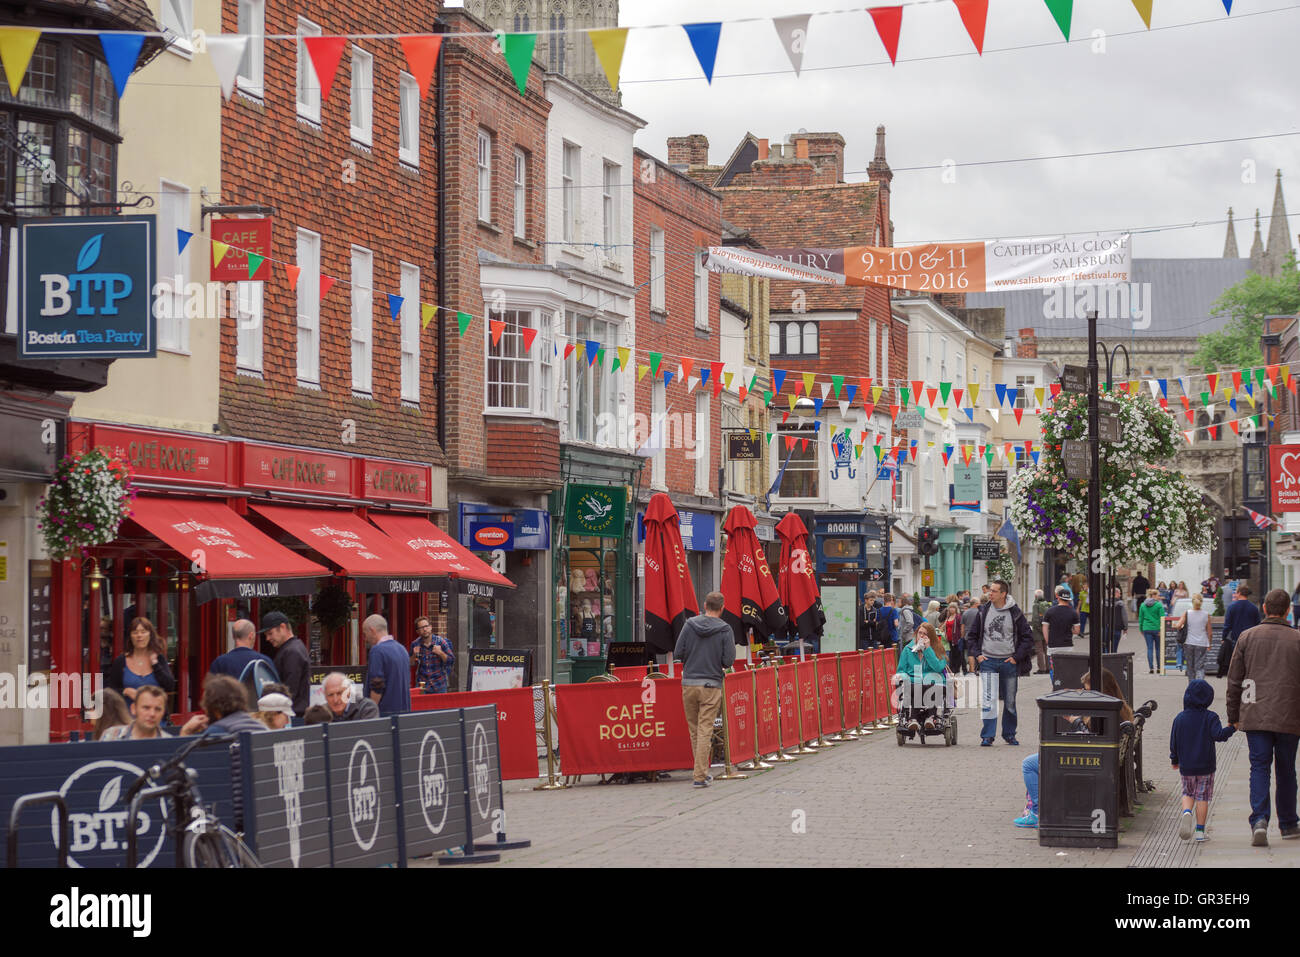 A busy shopping street in Salisbury Stock Photo